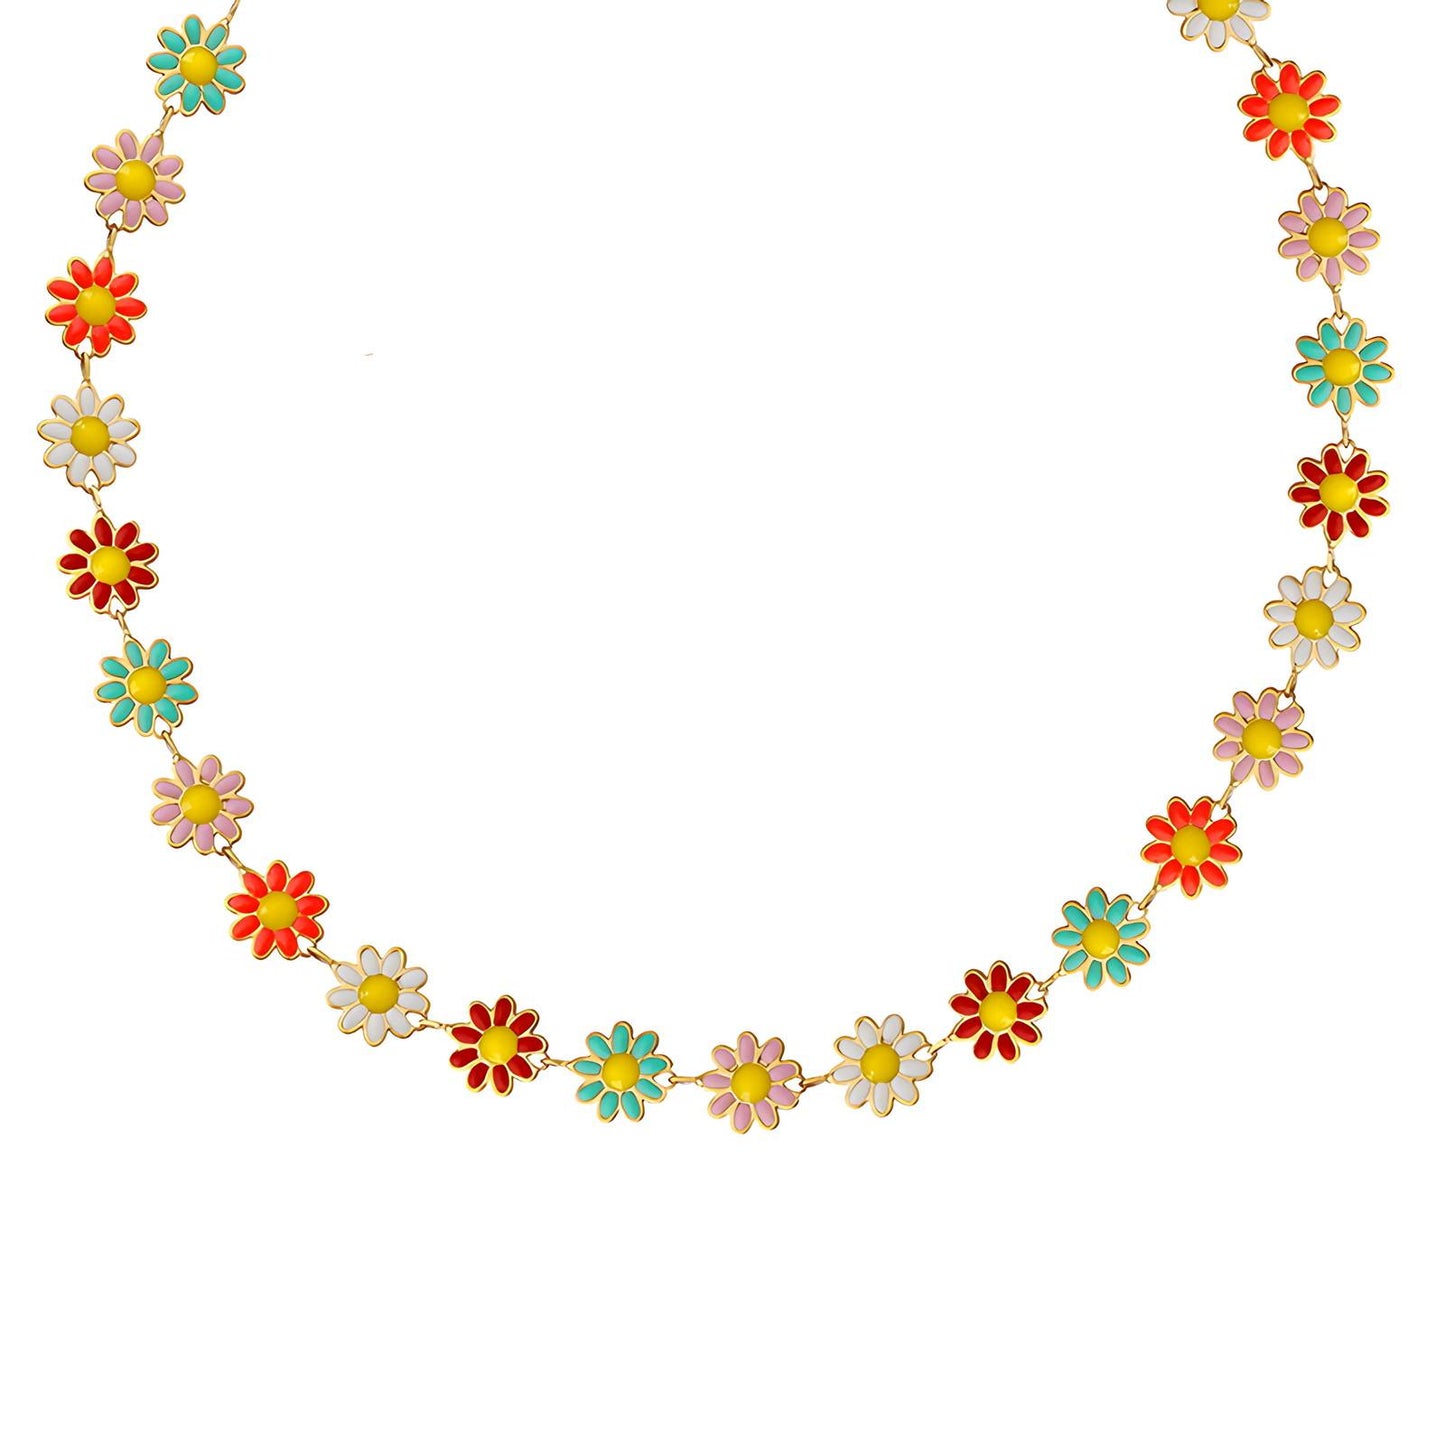 18K GOLD PLATED STAINLESS STEEL "FLOWERS" NECKLACE